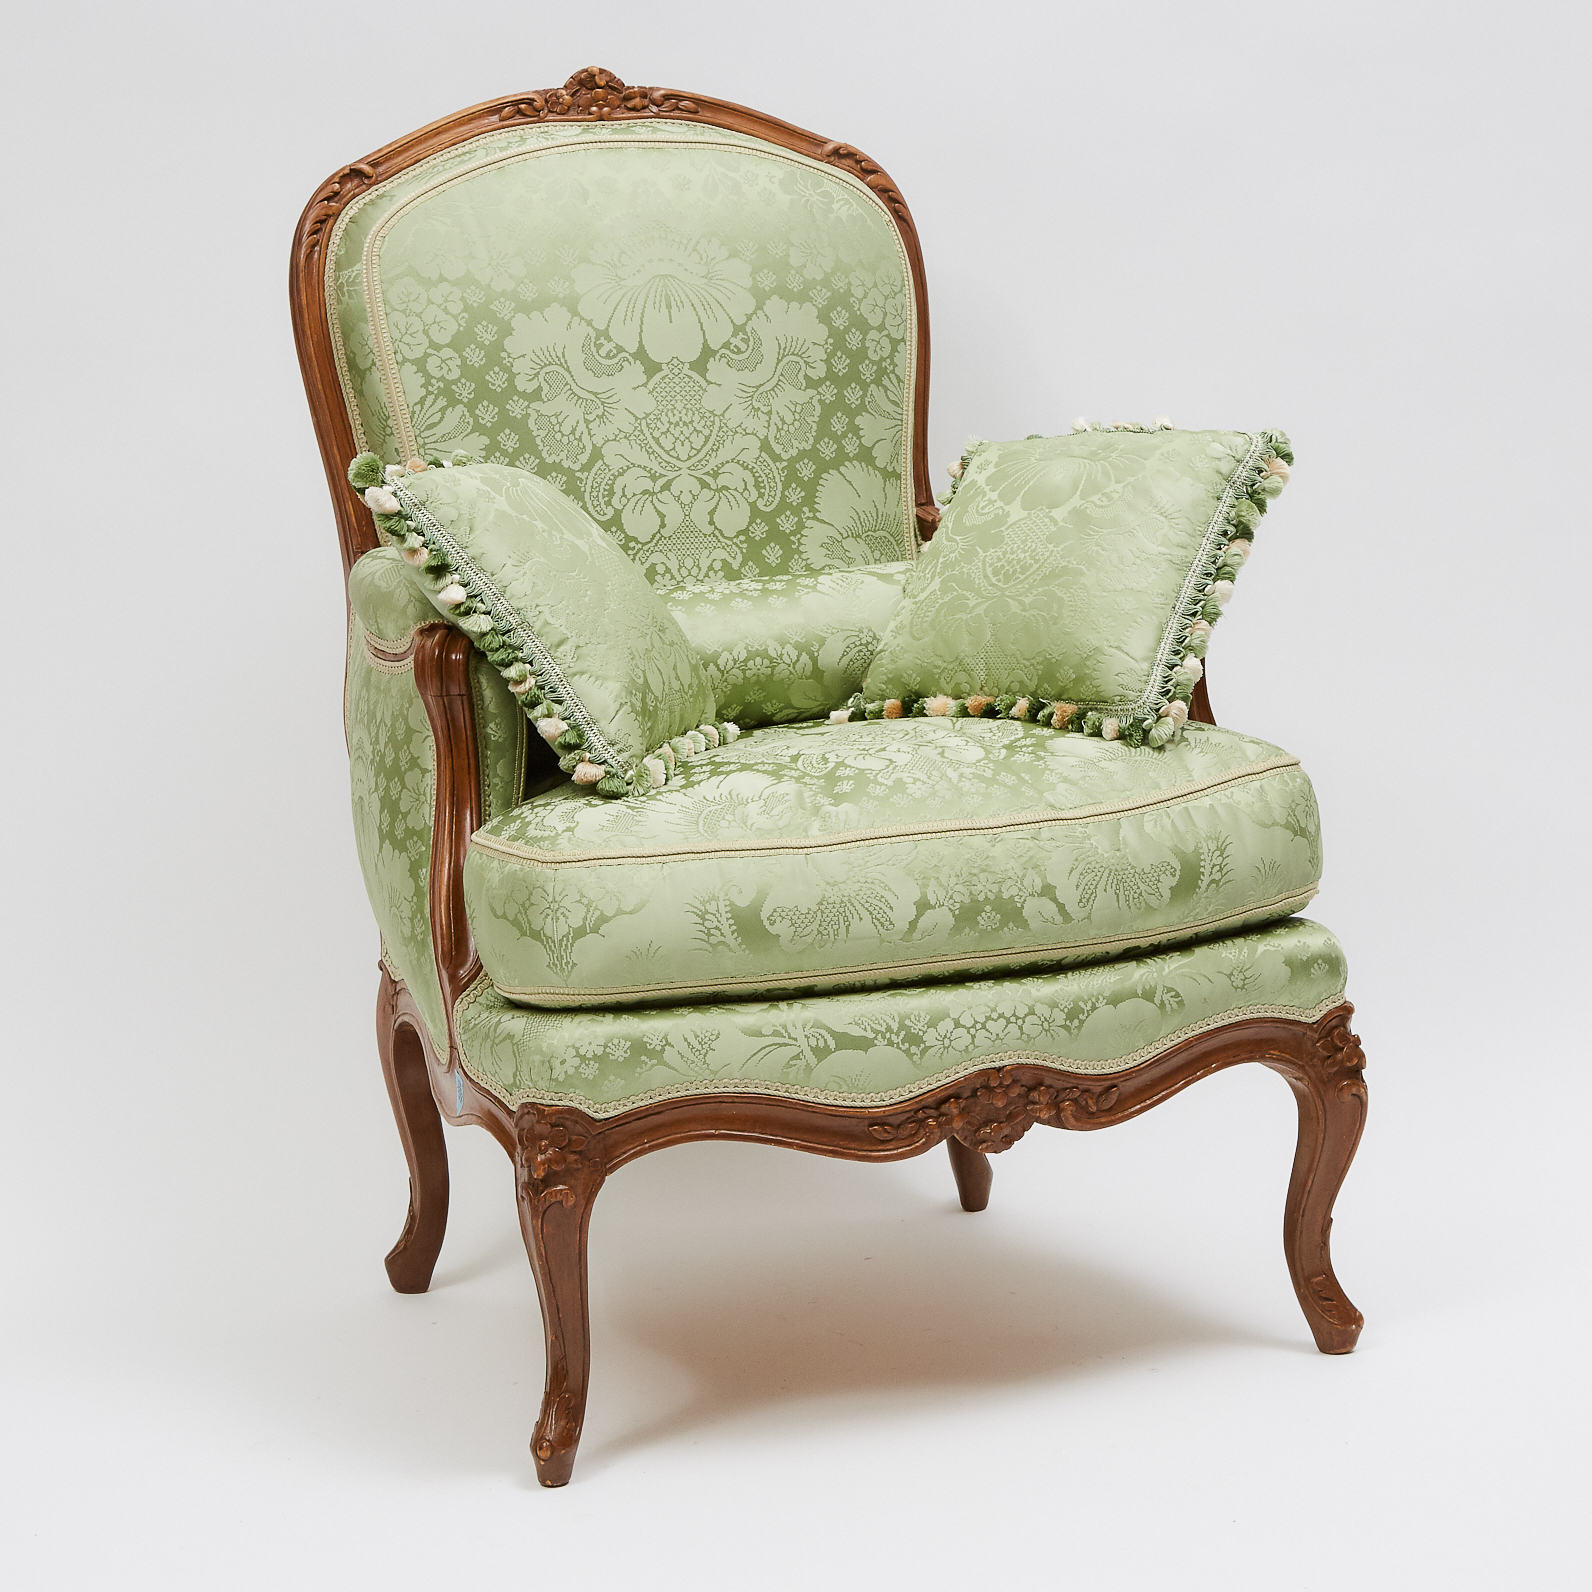 French Provincial Carved Walnut Bergere, 19th/early 20th century